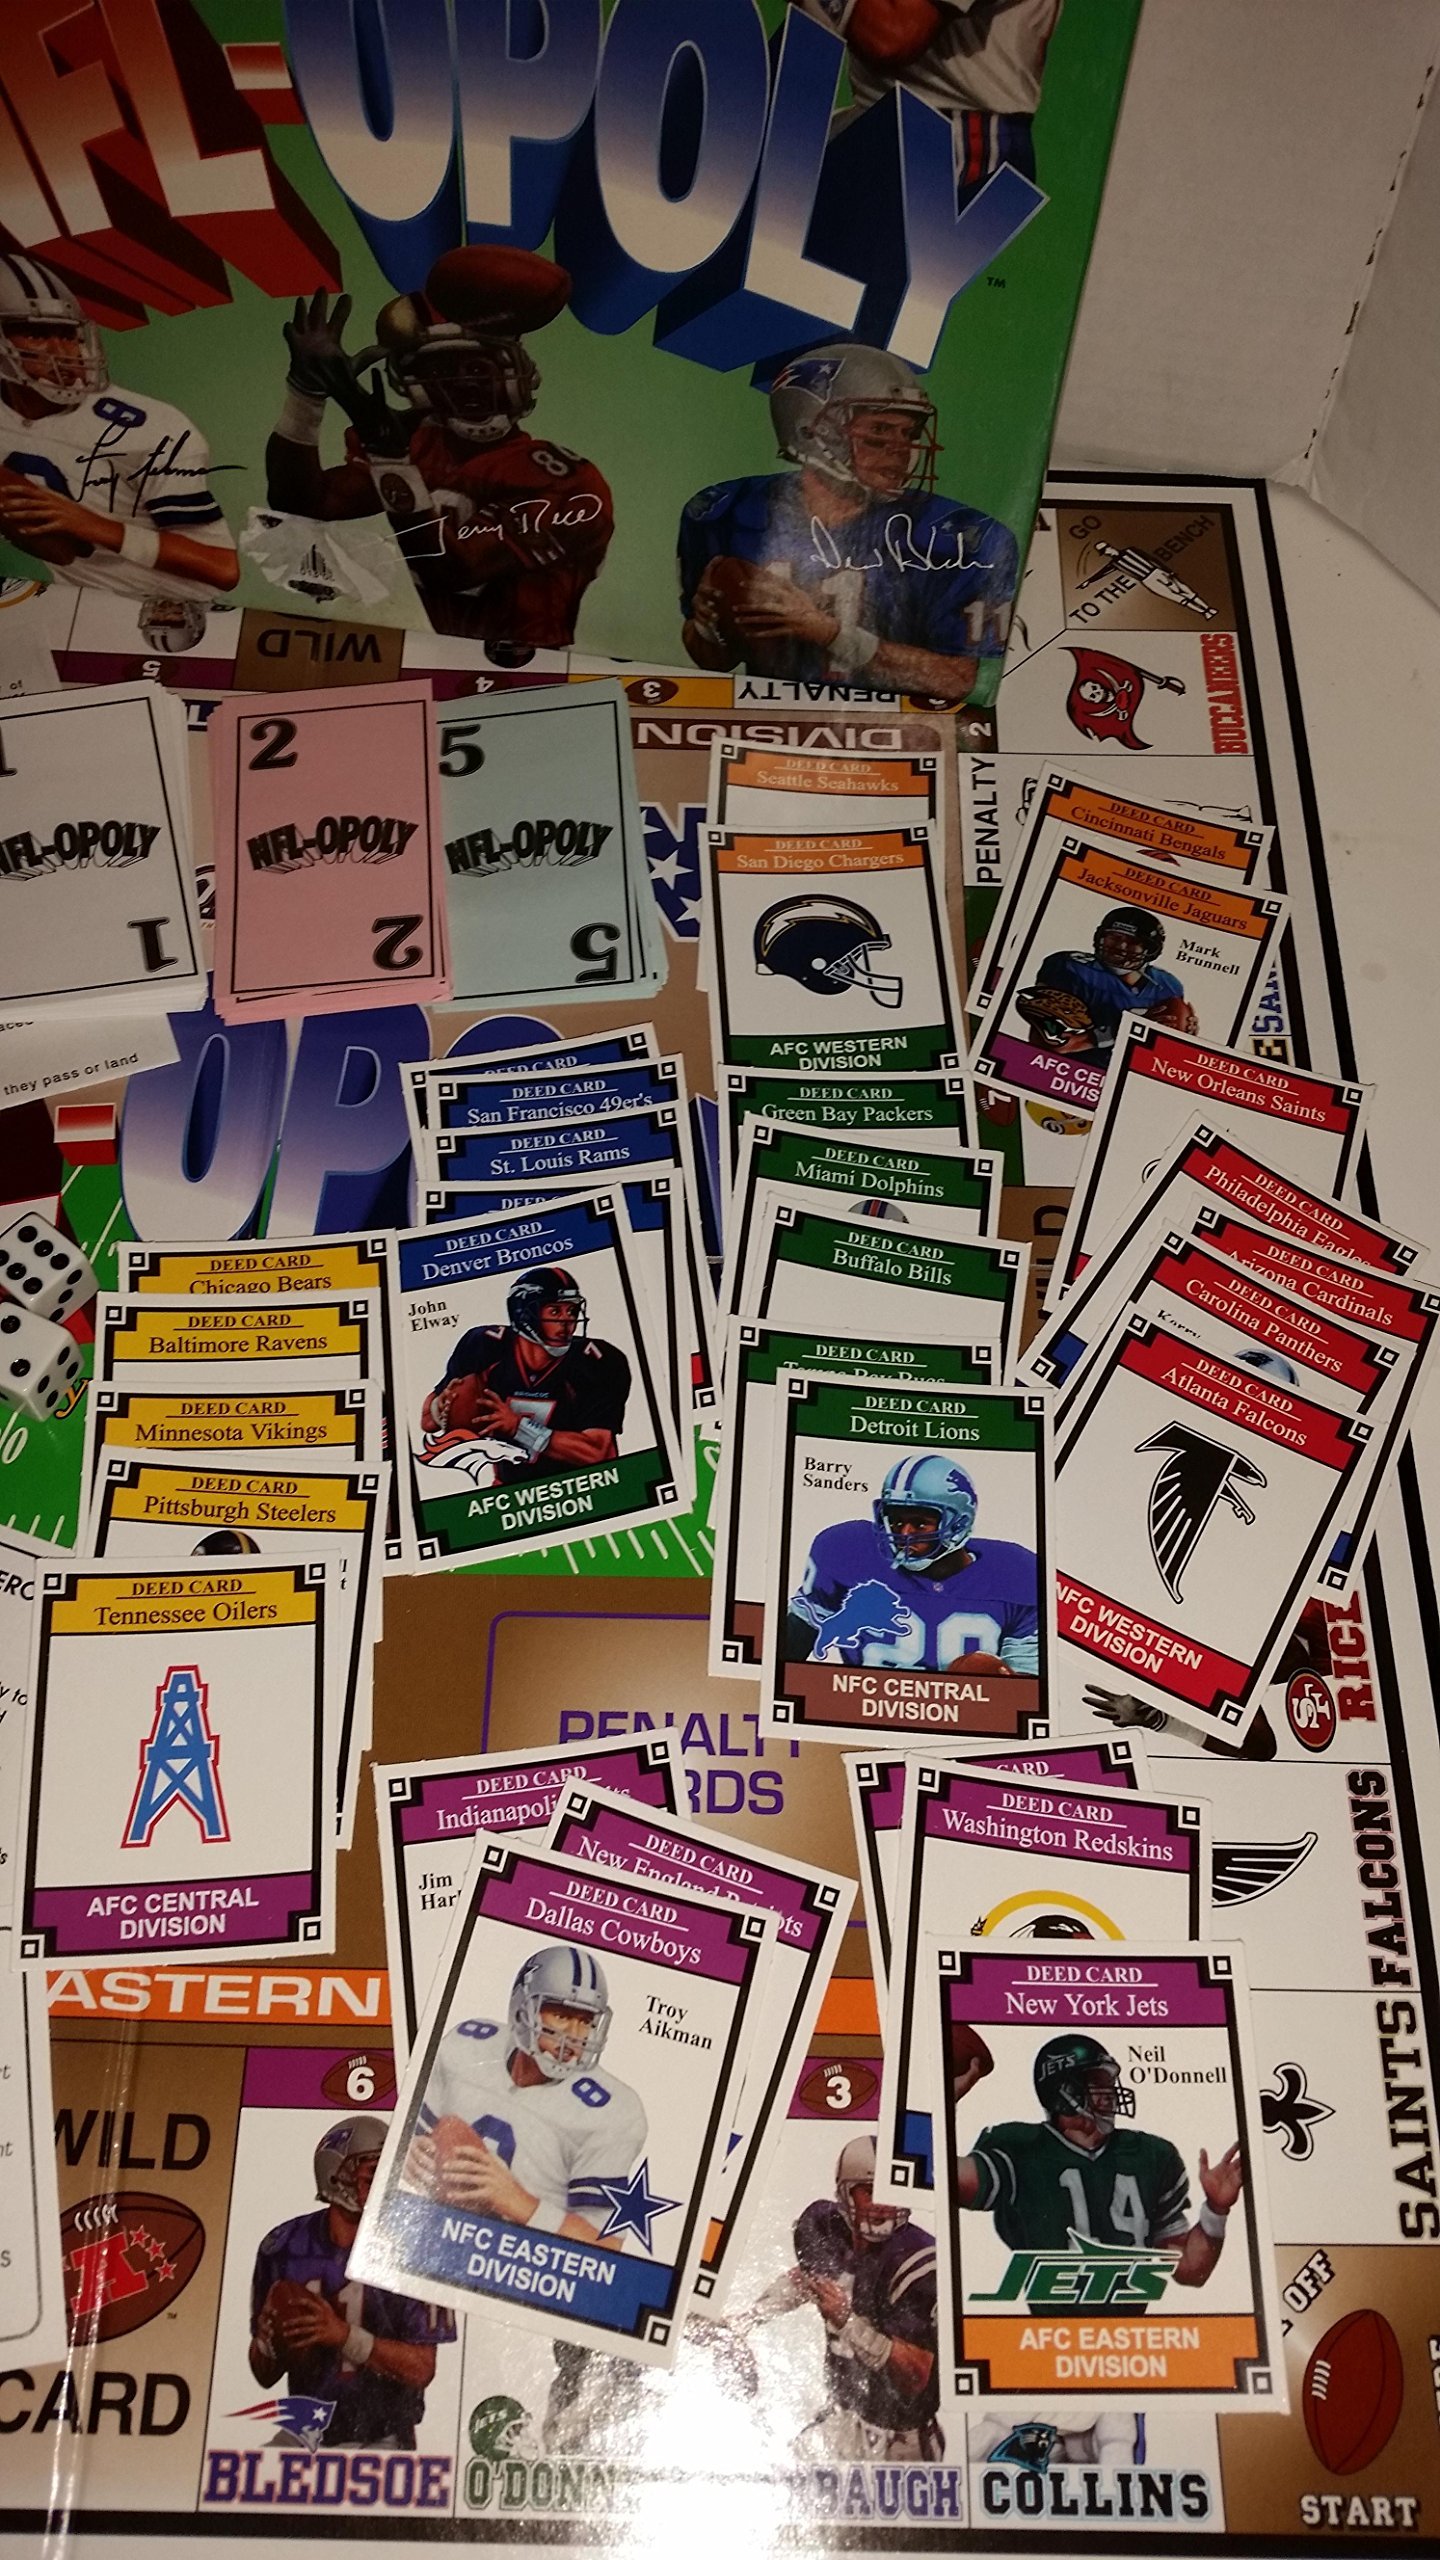 NFL-OPOLY - The Game of Champions